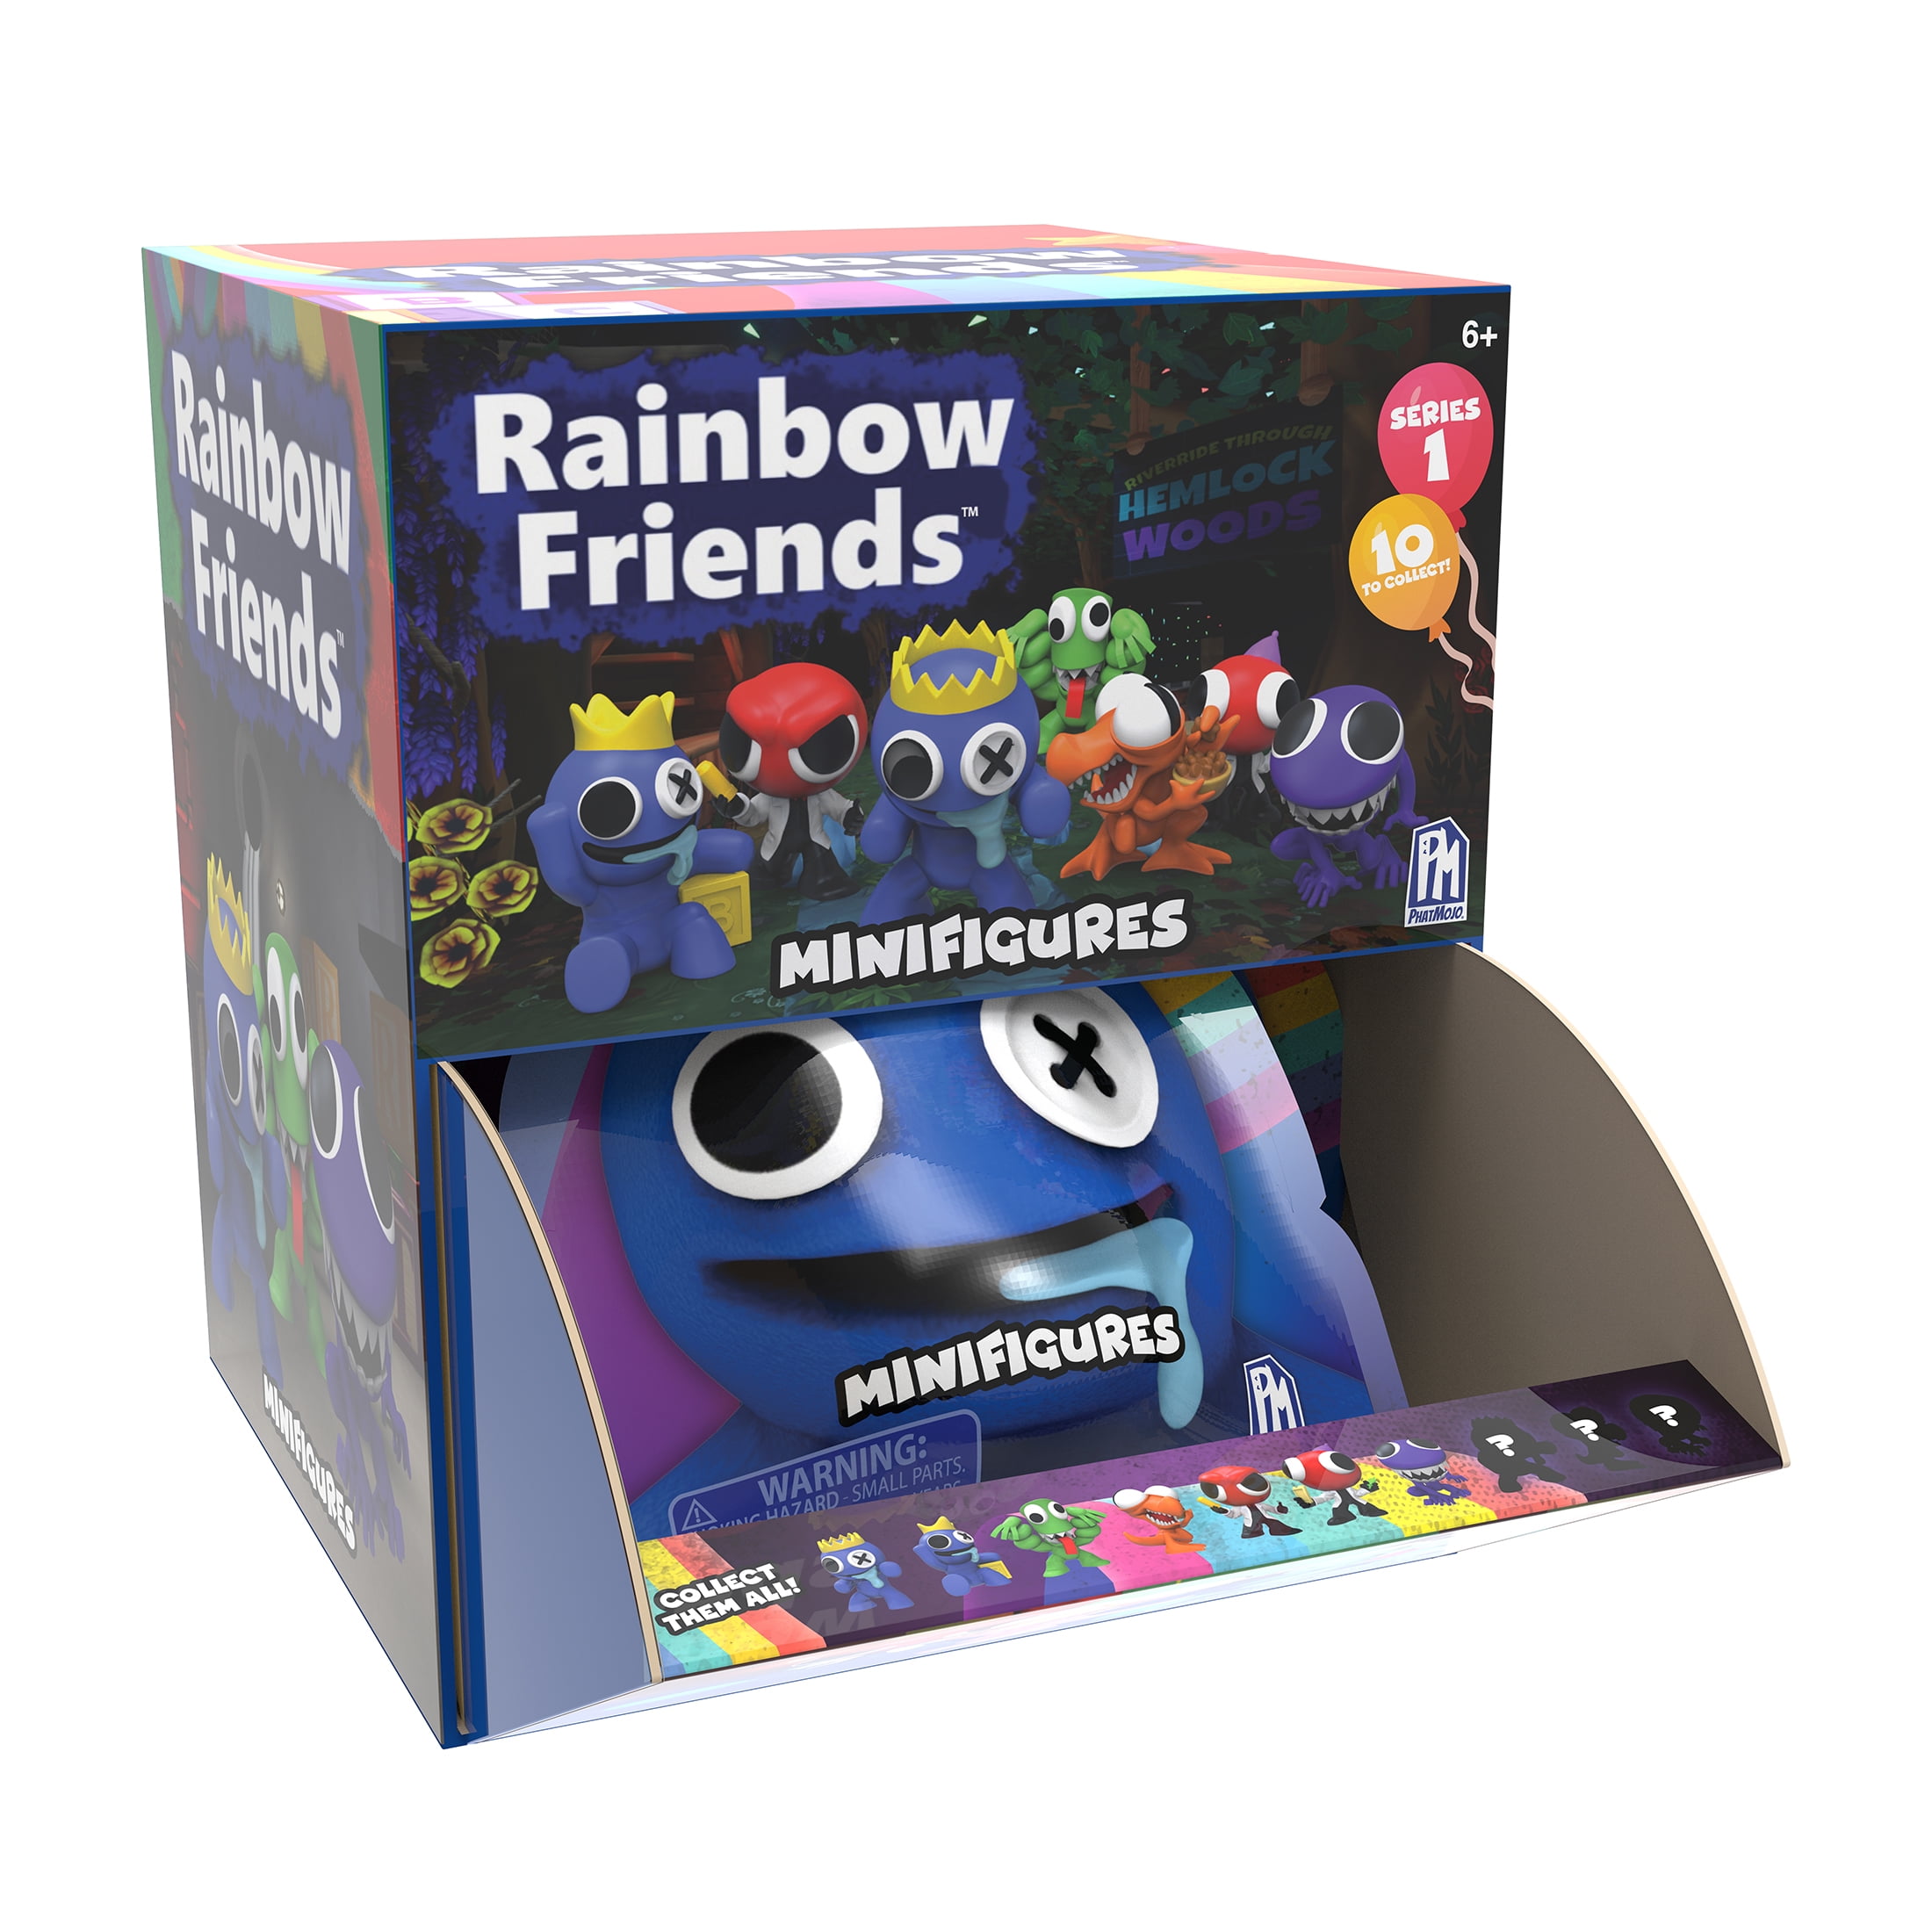 Why is Rainbow Friends green blind?